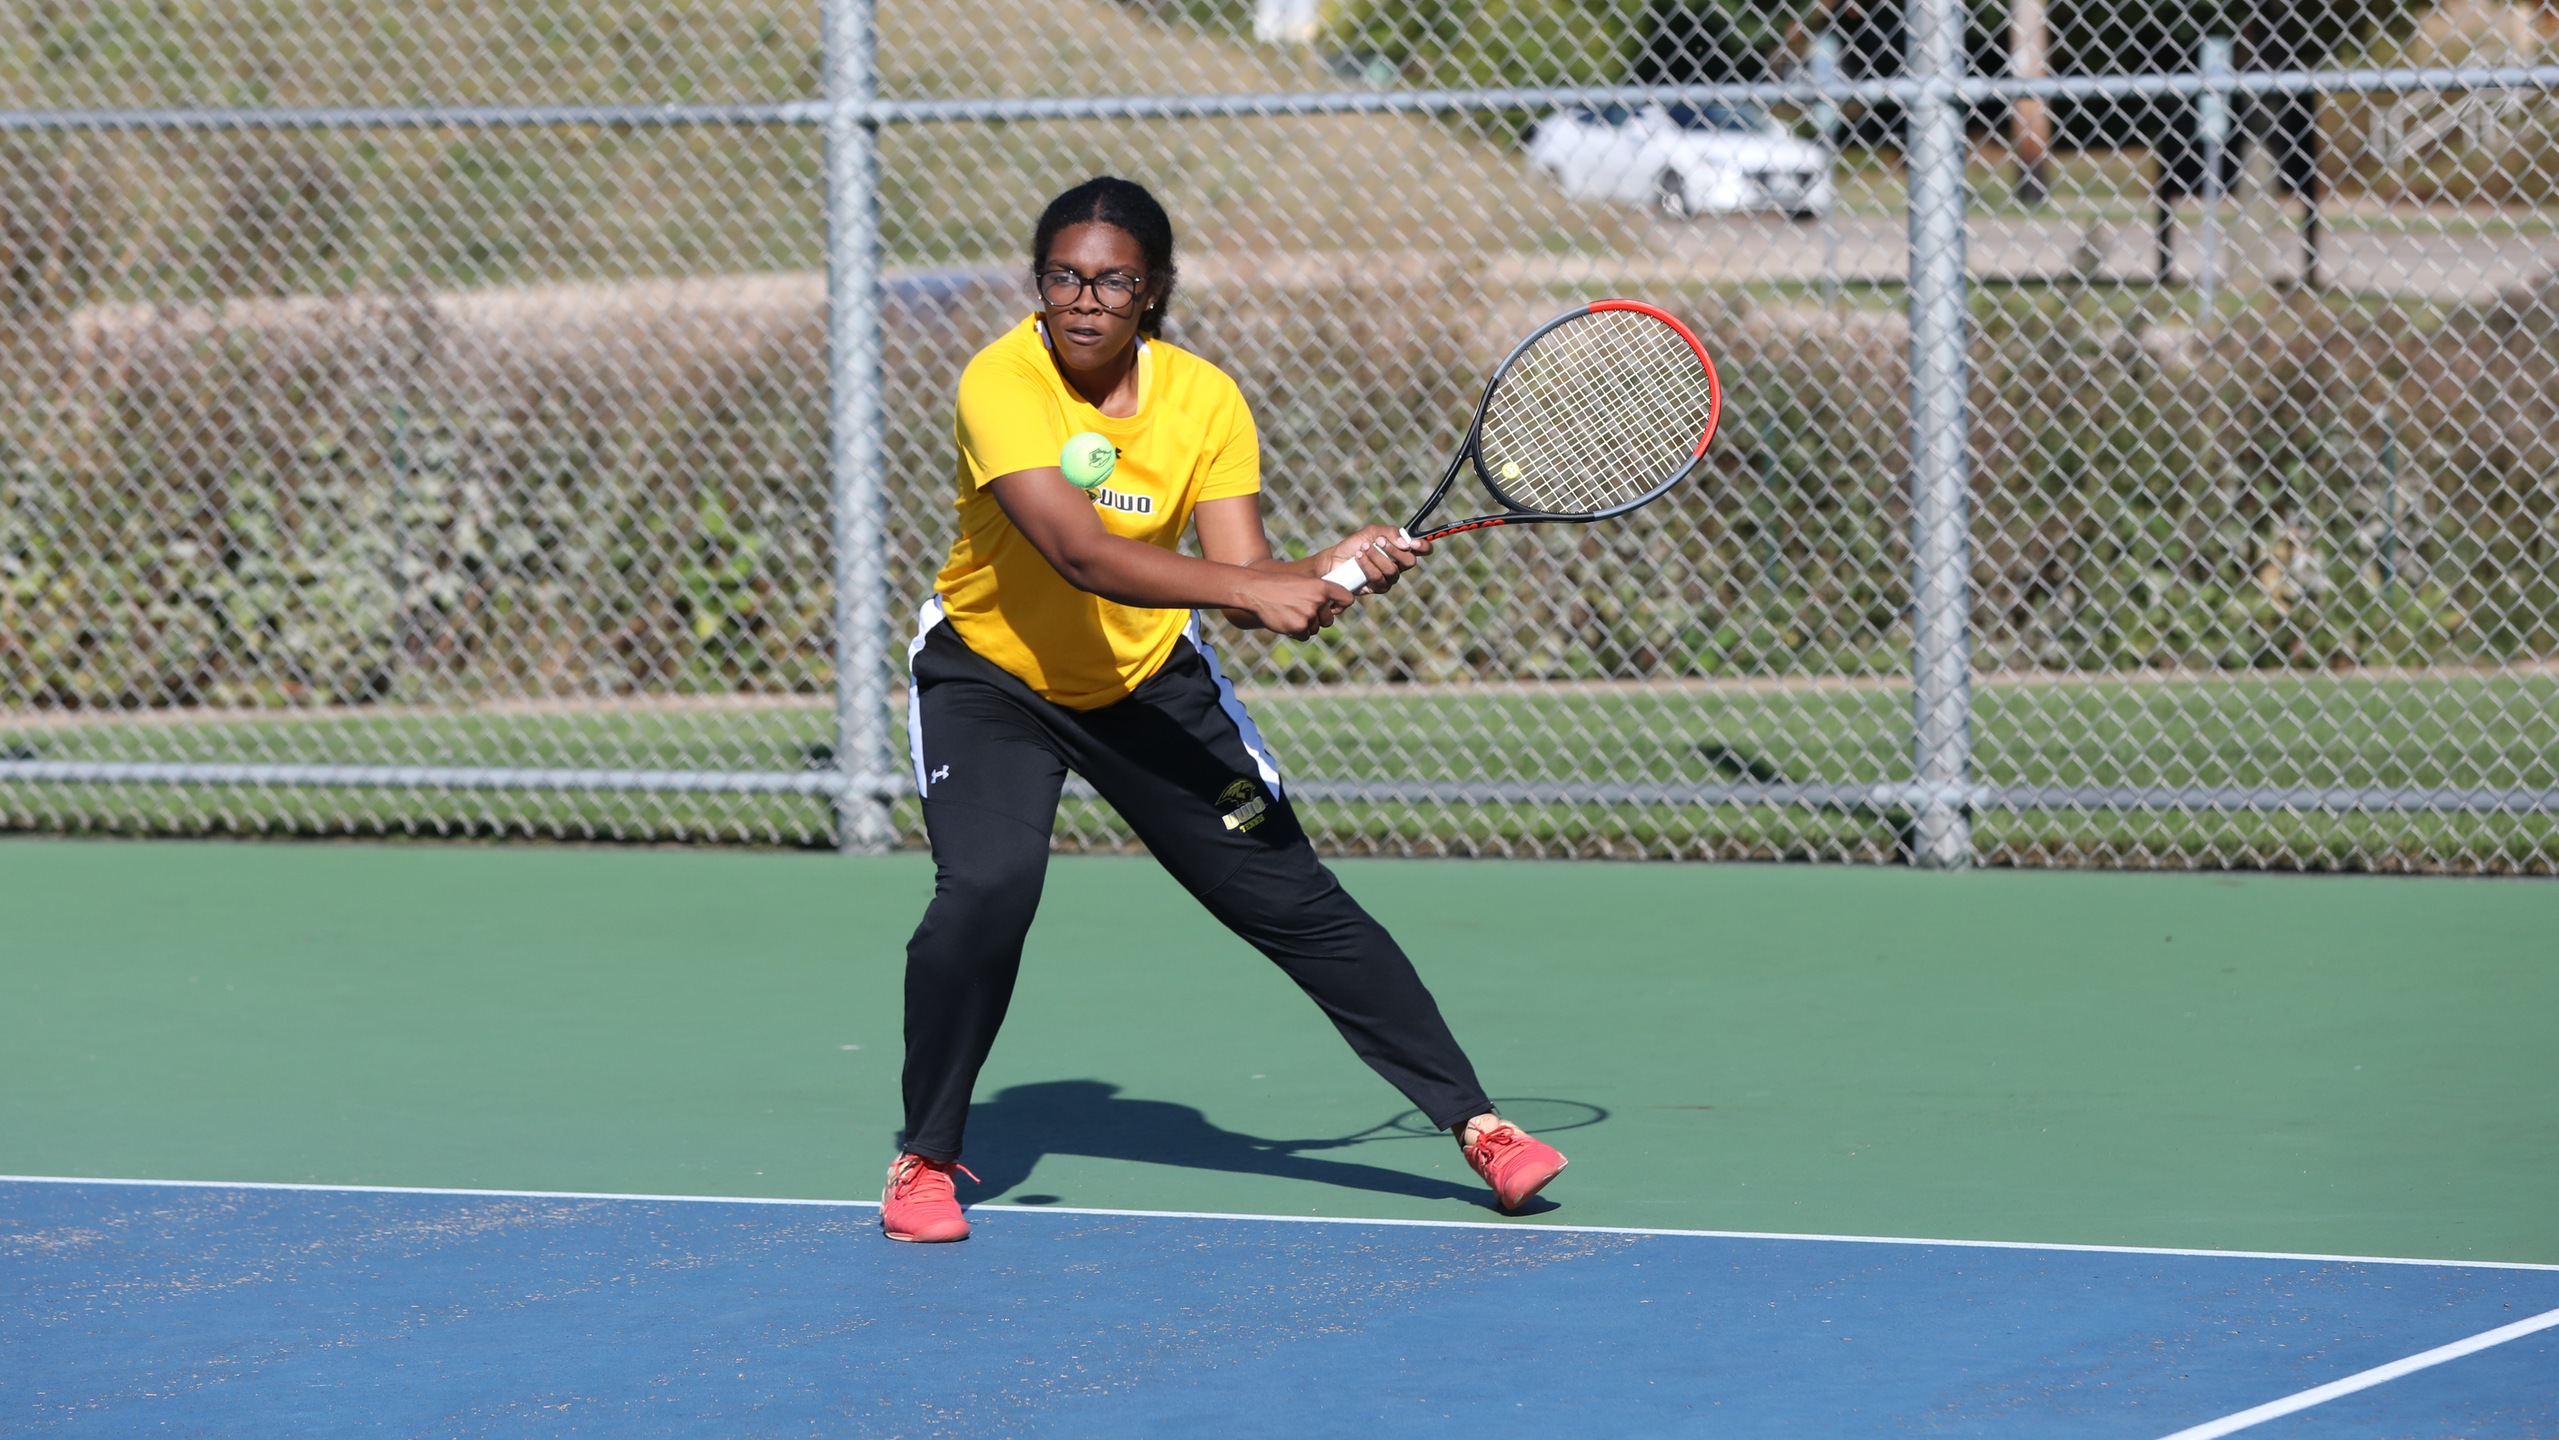 Michelle Spicer helped UW-Oshkosh to its win over Marian University with her victory at No. 1 singles.